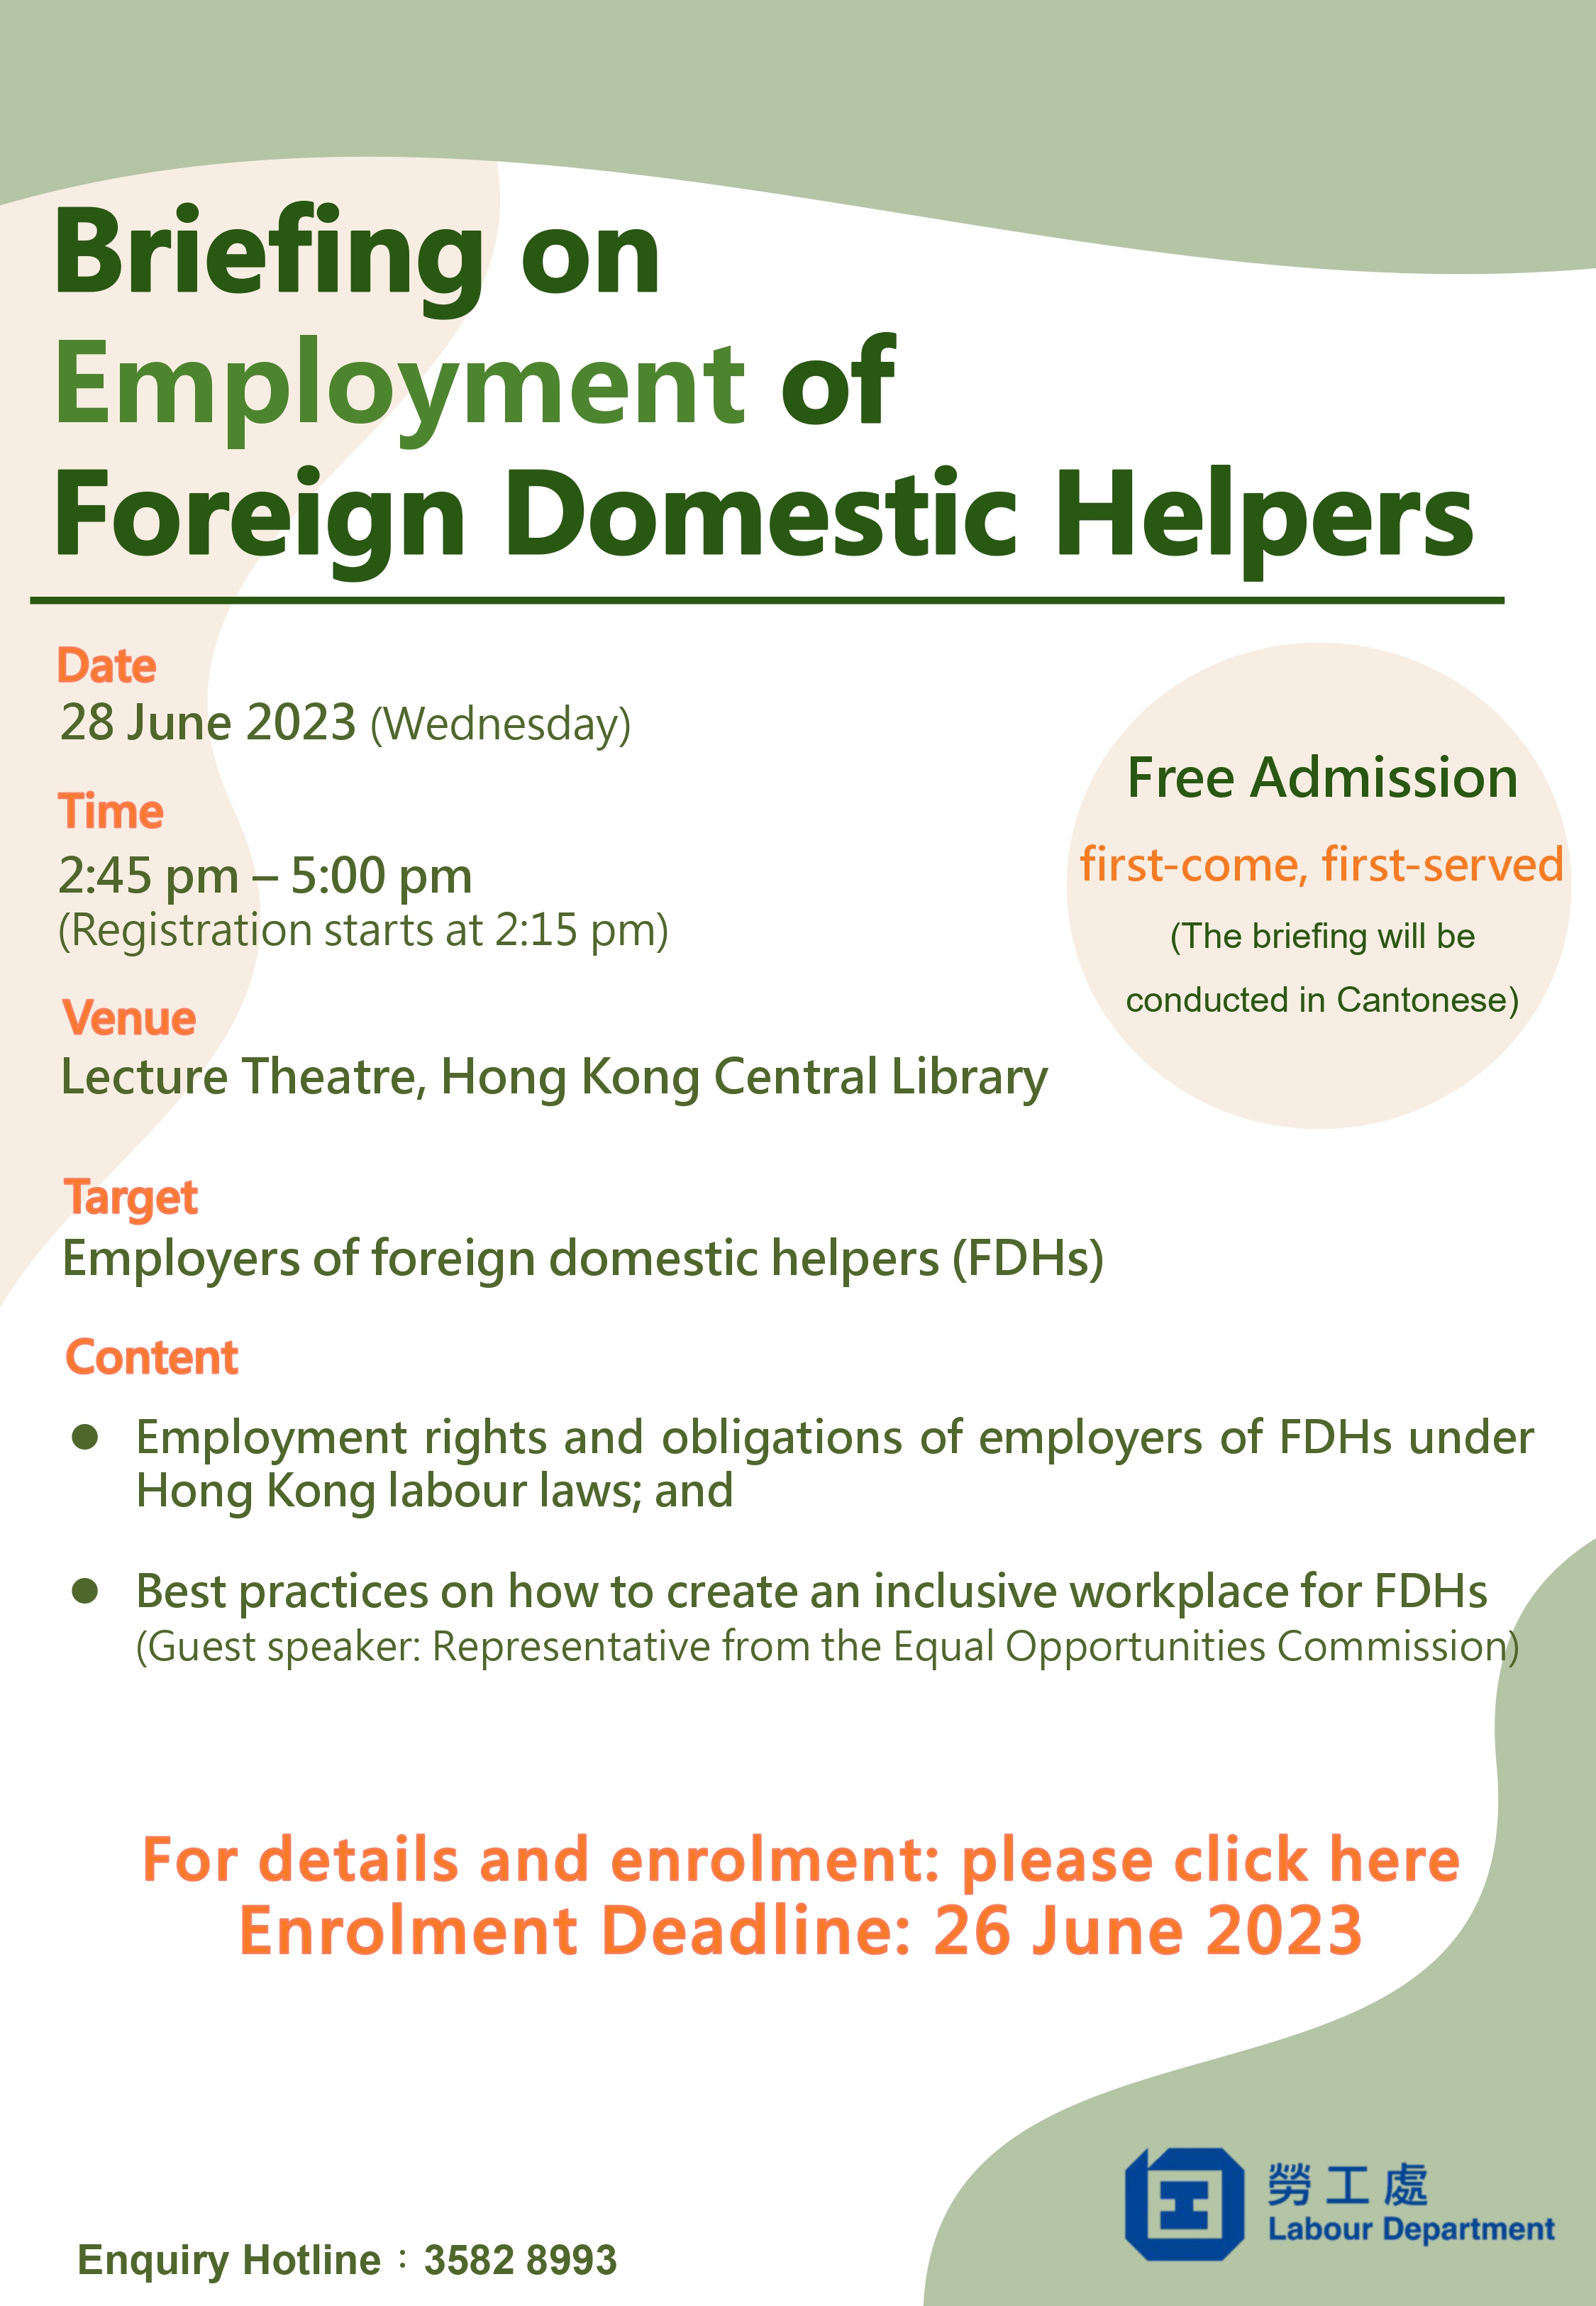 Briefing on Employment of Foreign Domestic Helpers